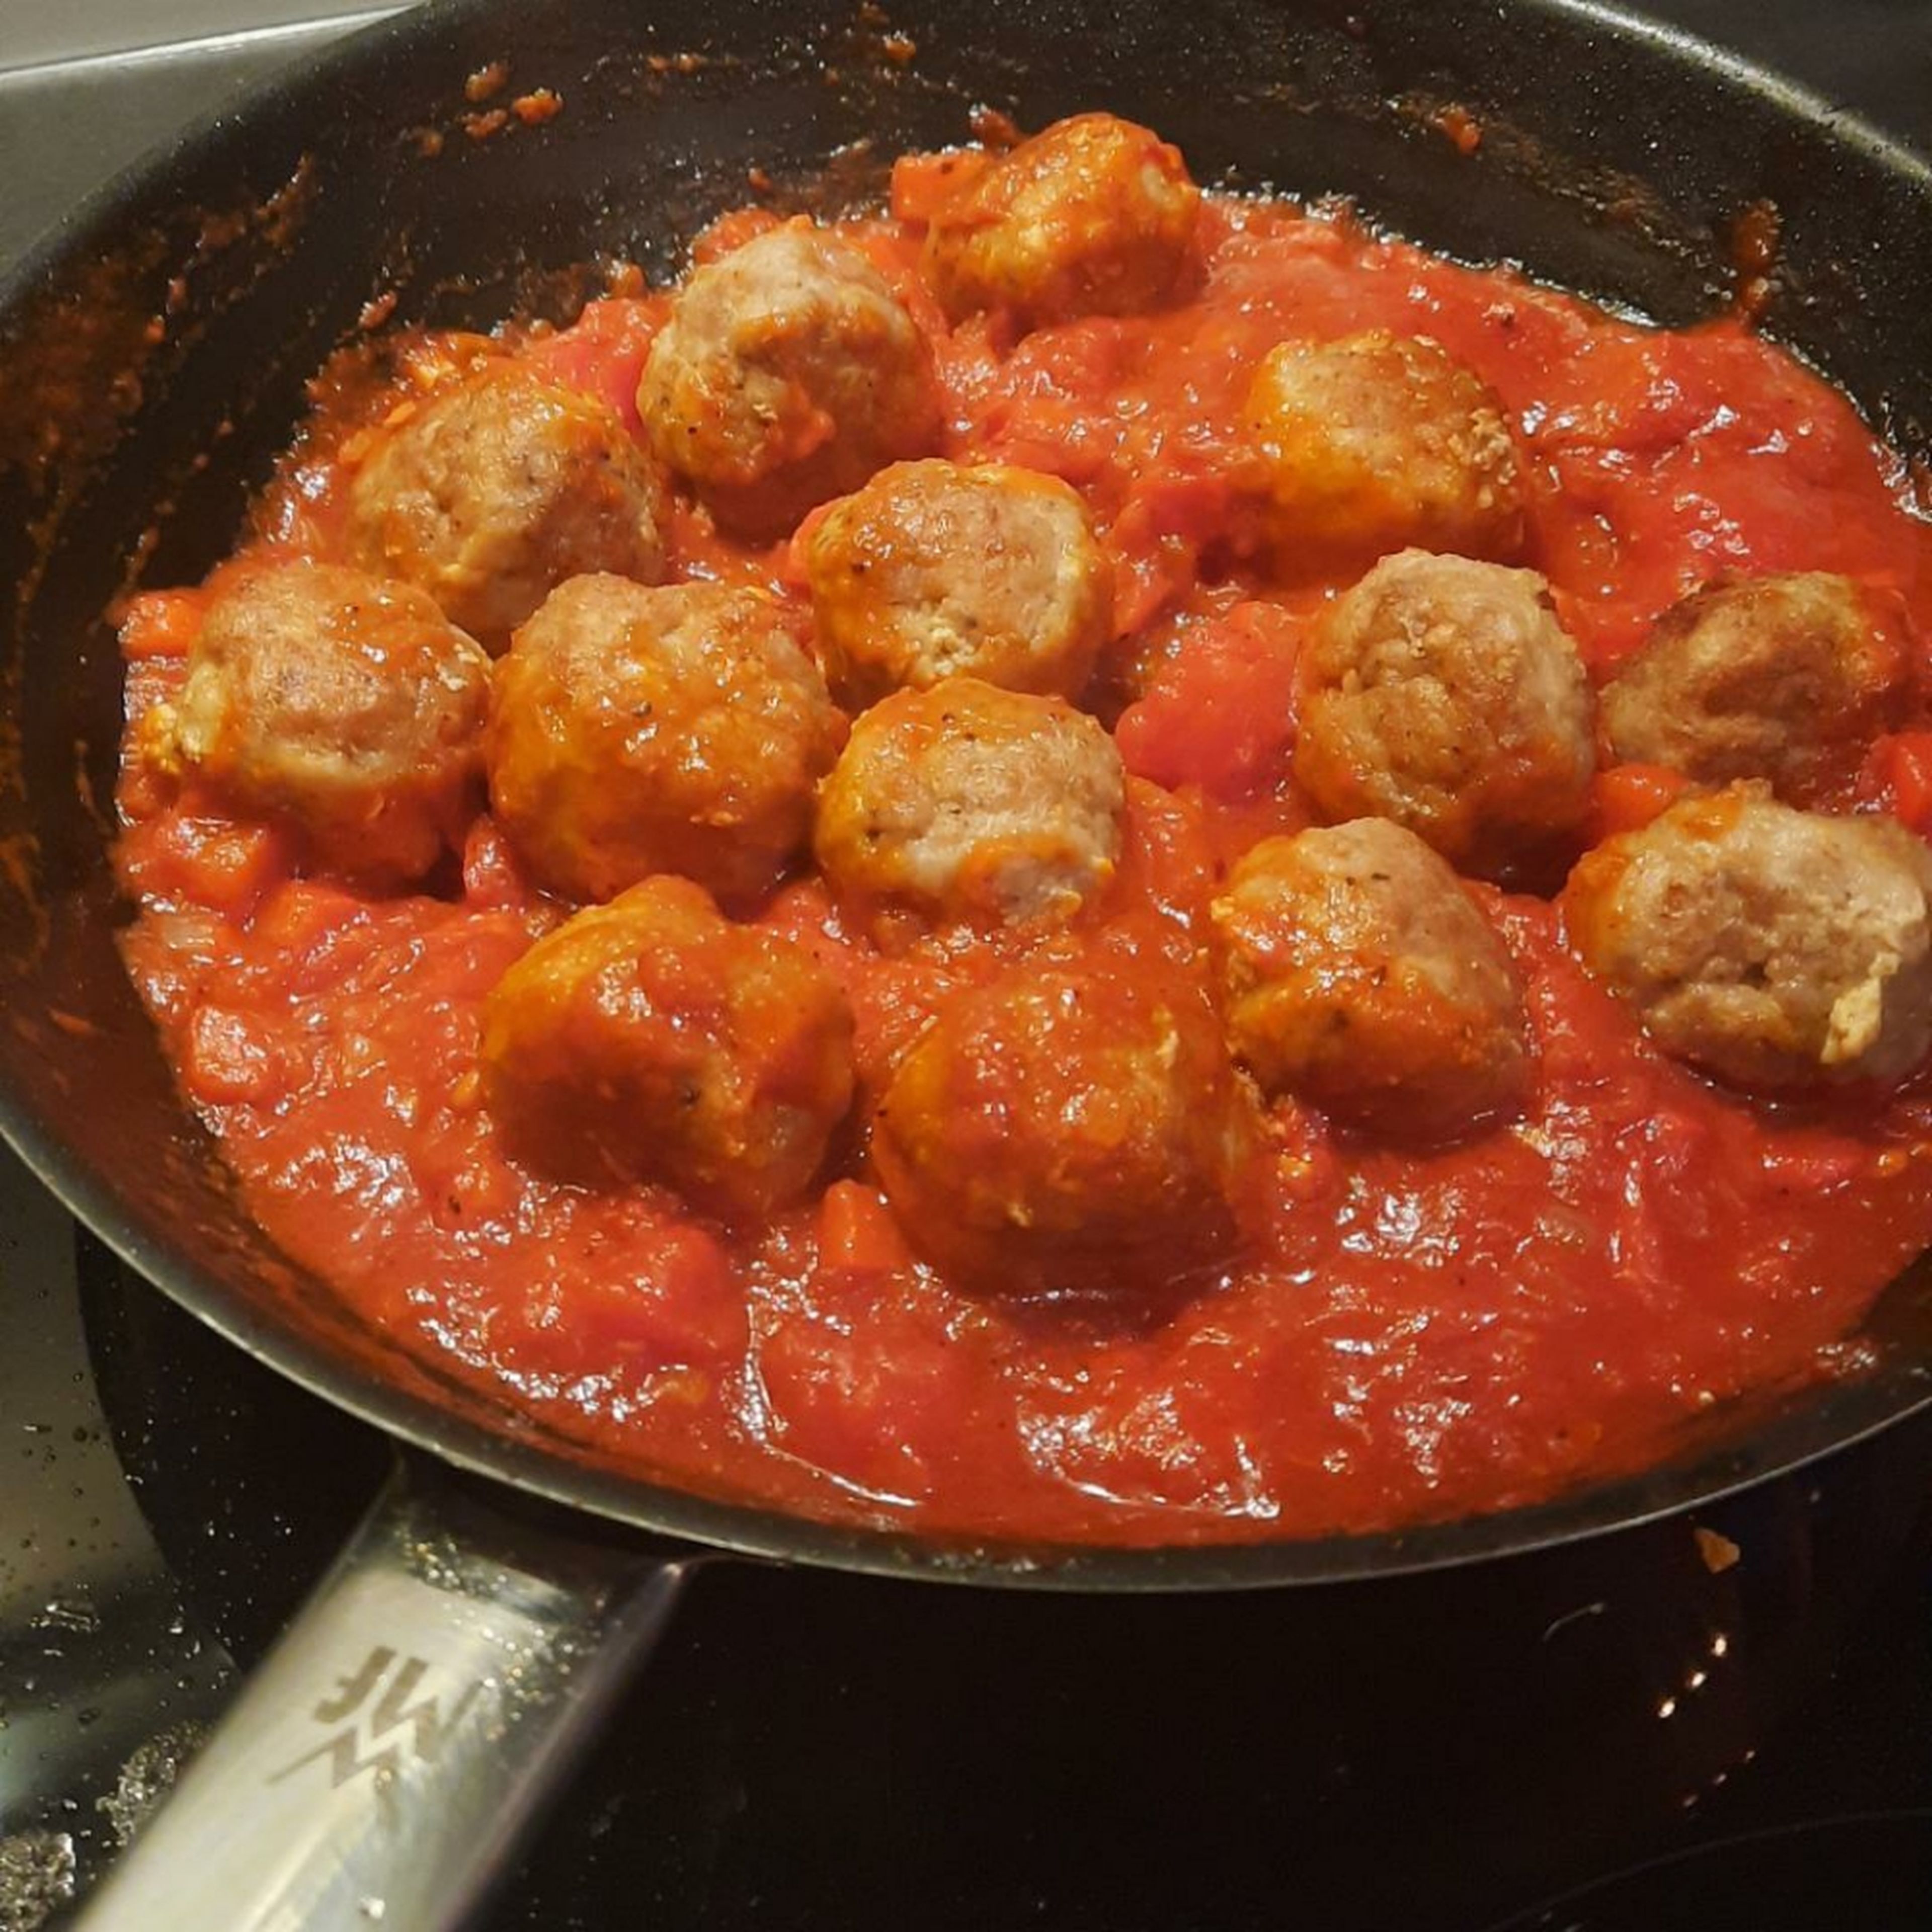 Add the meatballs into the sauce and let them simmer over low heat for approx. 20 min. Garnish with chopped parsley and serve (it looks really nice served in the pan!). Enjoy!